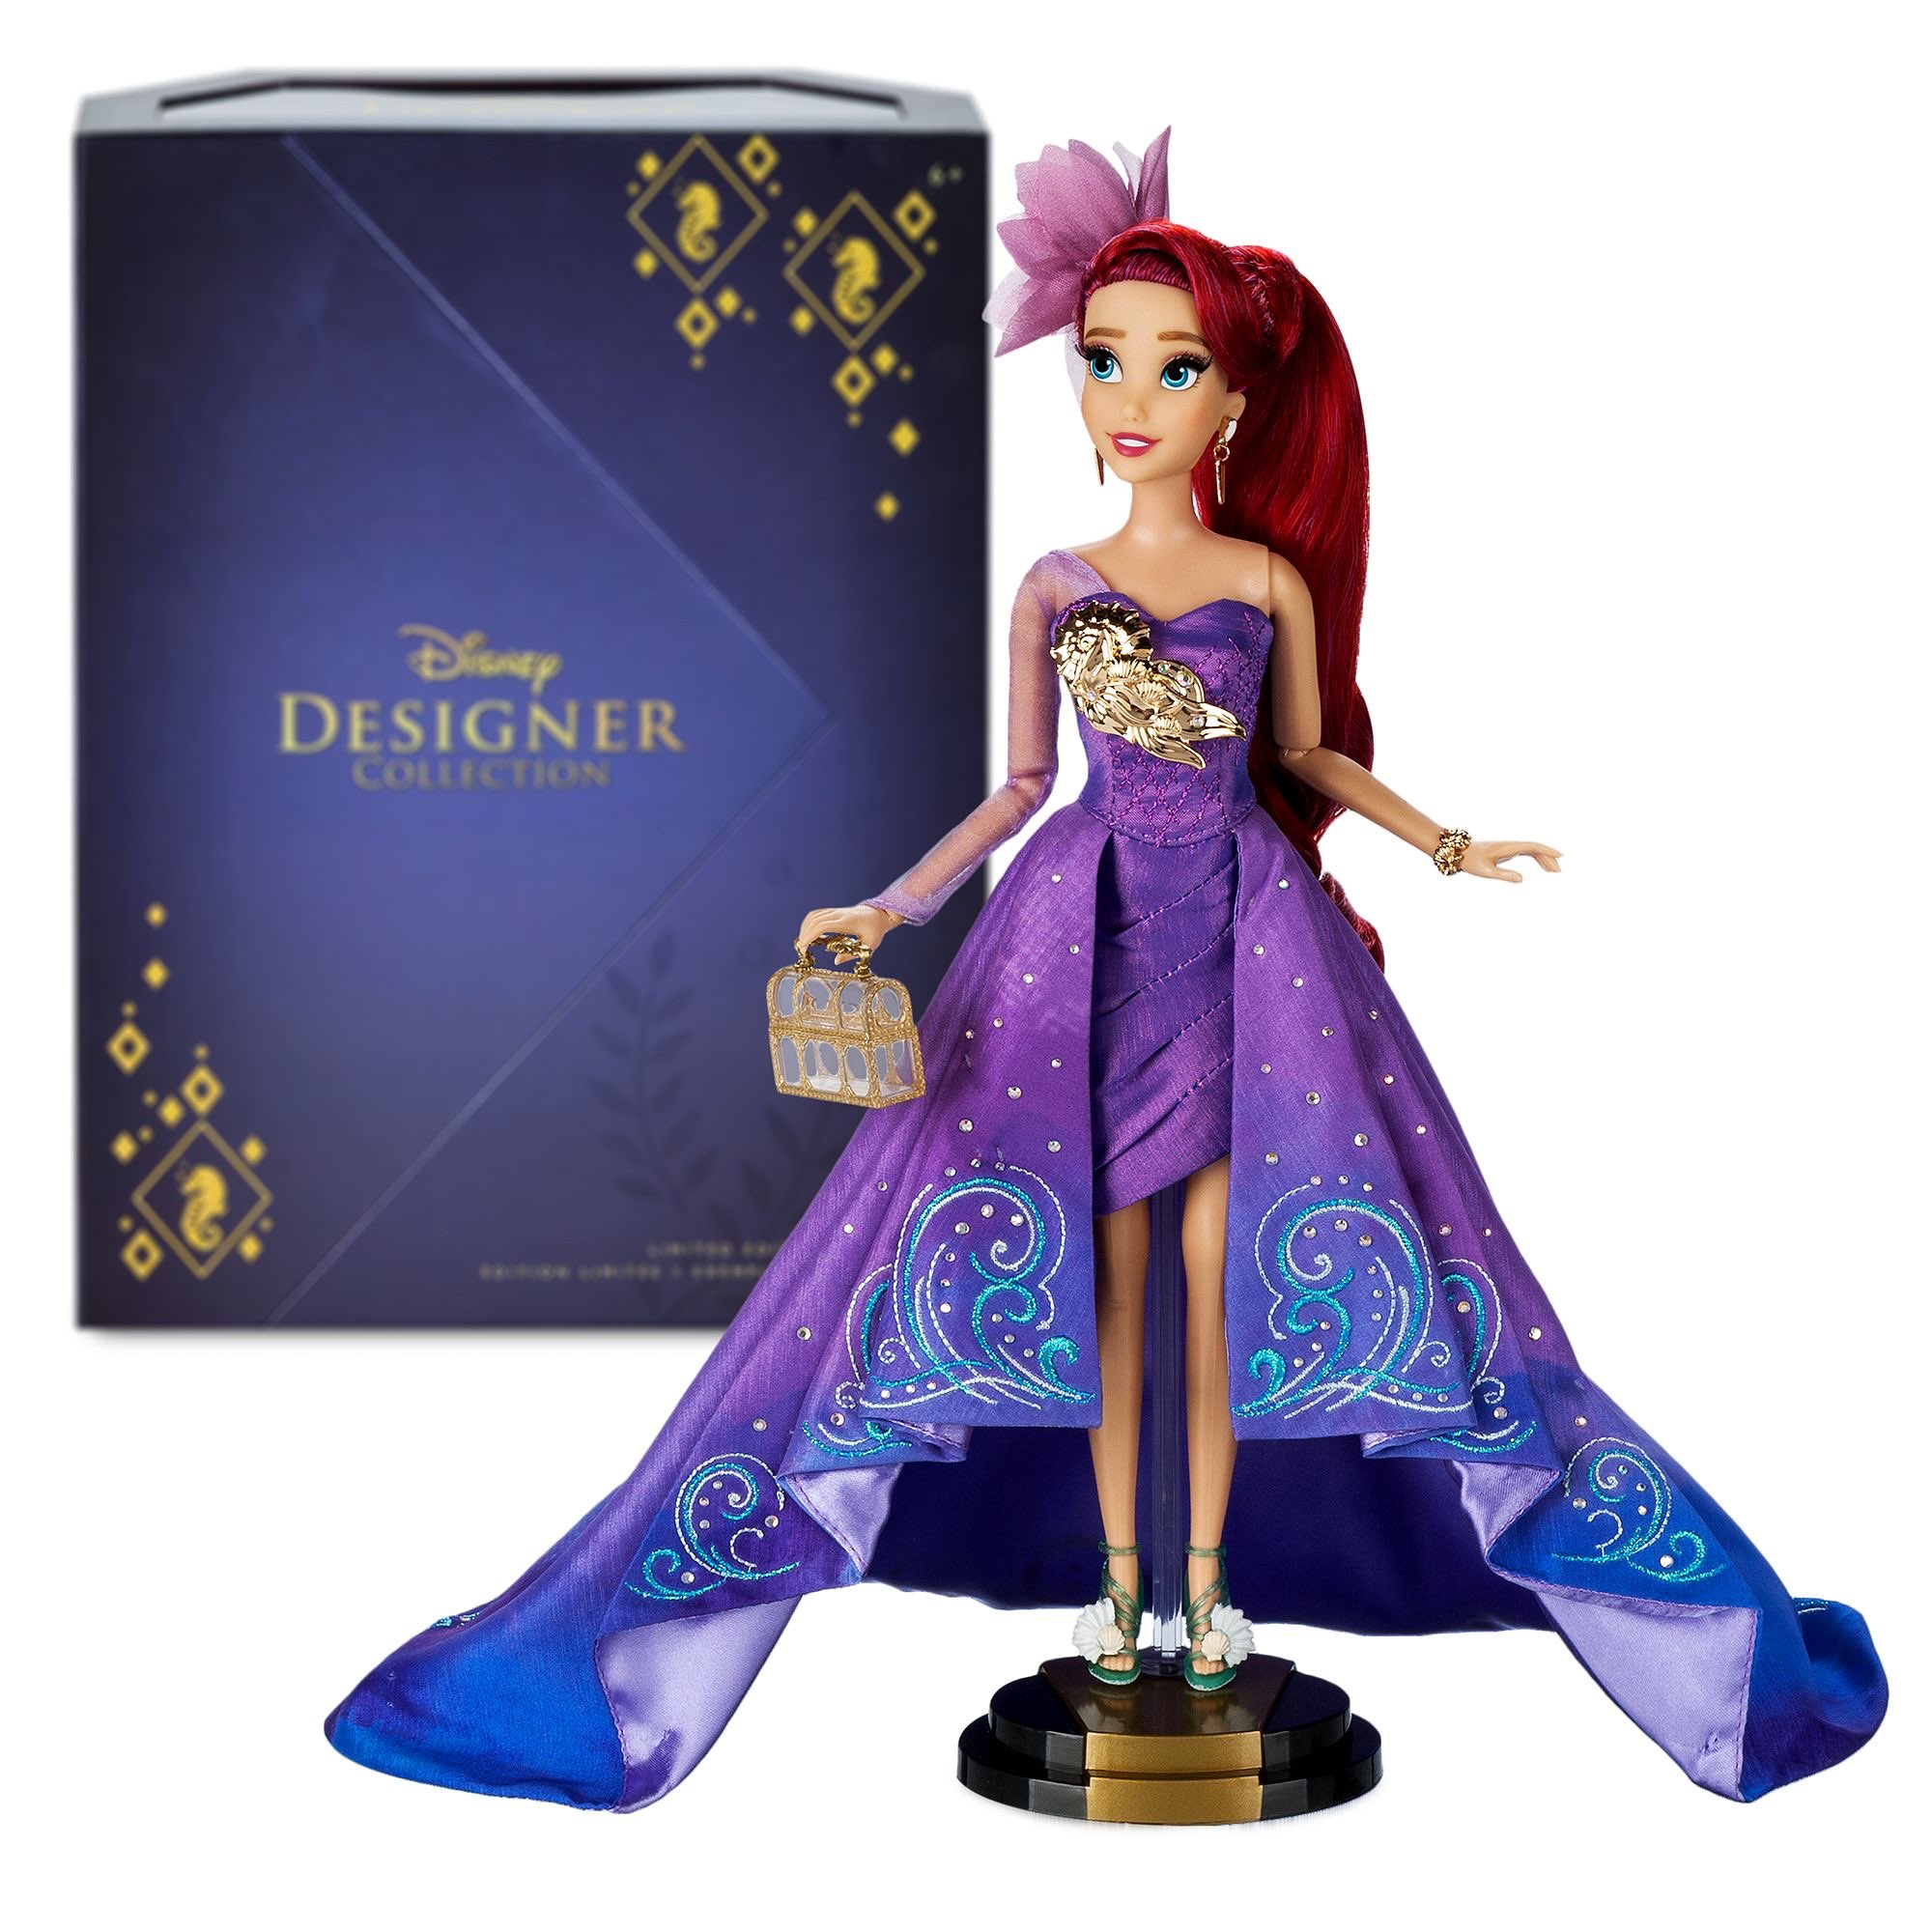 15 new Disney Store Designer Collection Limited Edition Dolls 2021 - 2022 Ultimate Princess - YouLoveIt.com